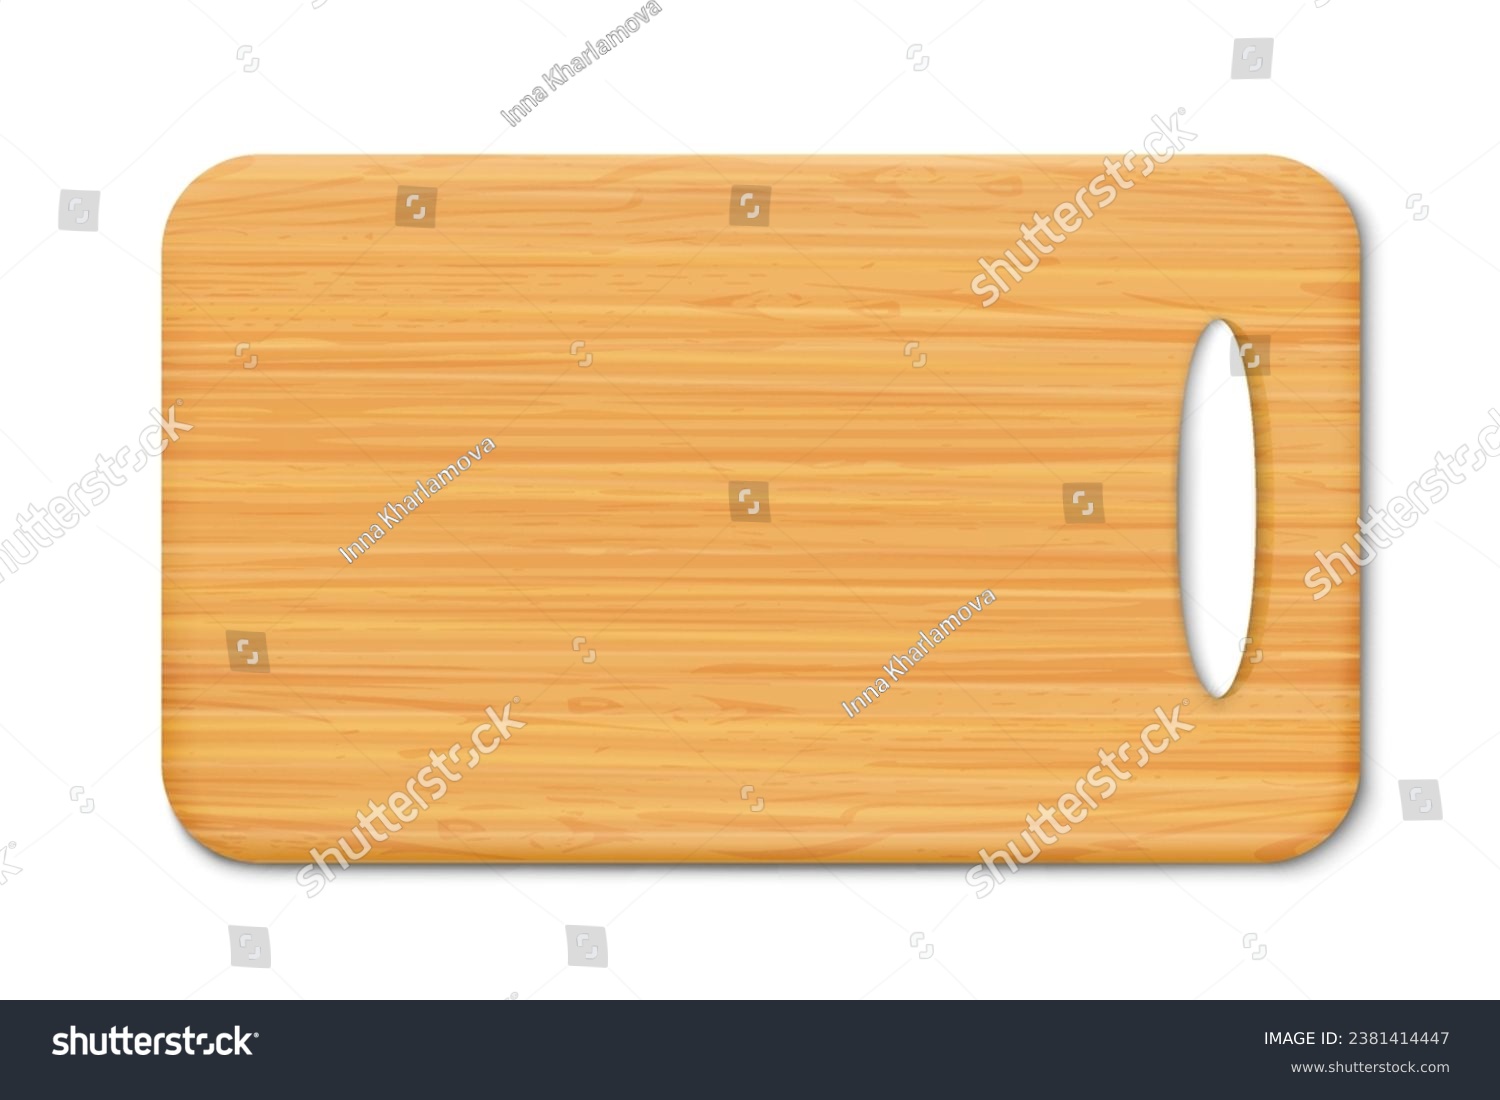 SVG of New rectangular wooden cutting board, top view, isolated on white background. Trays or plate of rectangular shapes, natural, eco-friendly kitchen utensils, realistic 3d vector illustration. svg